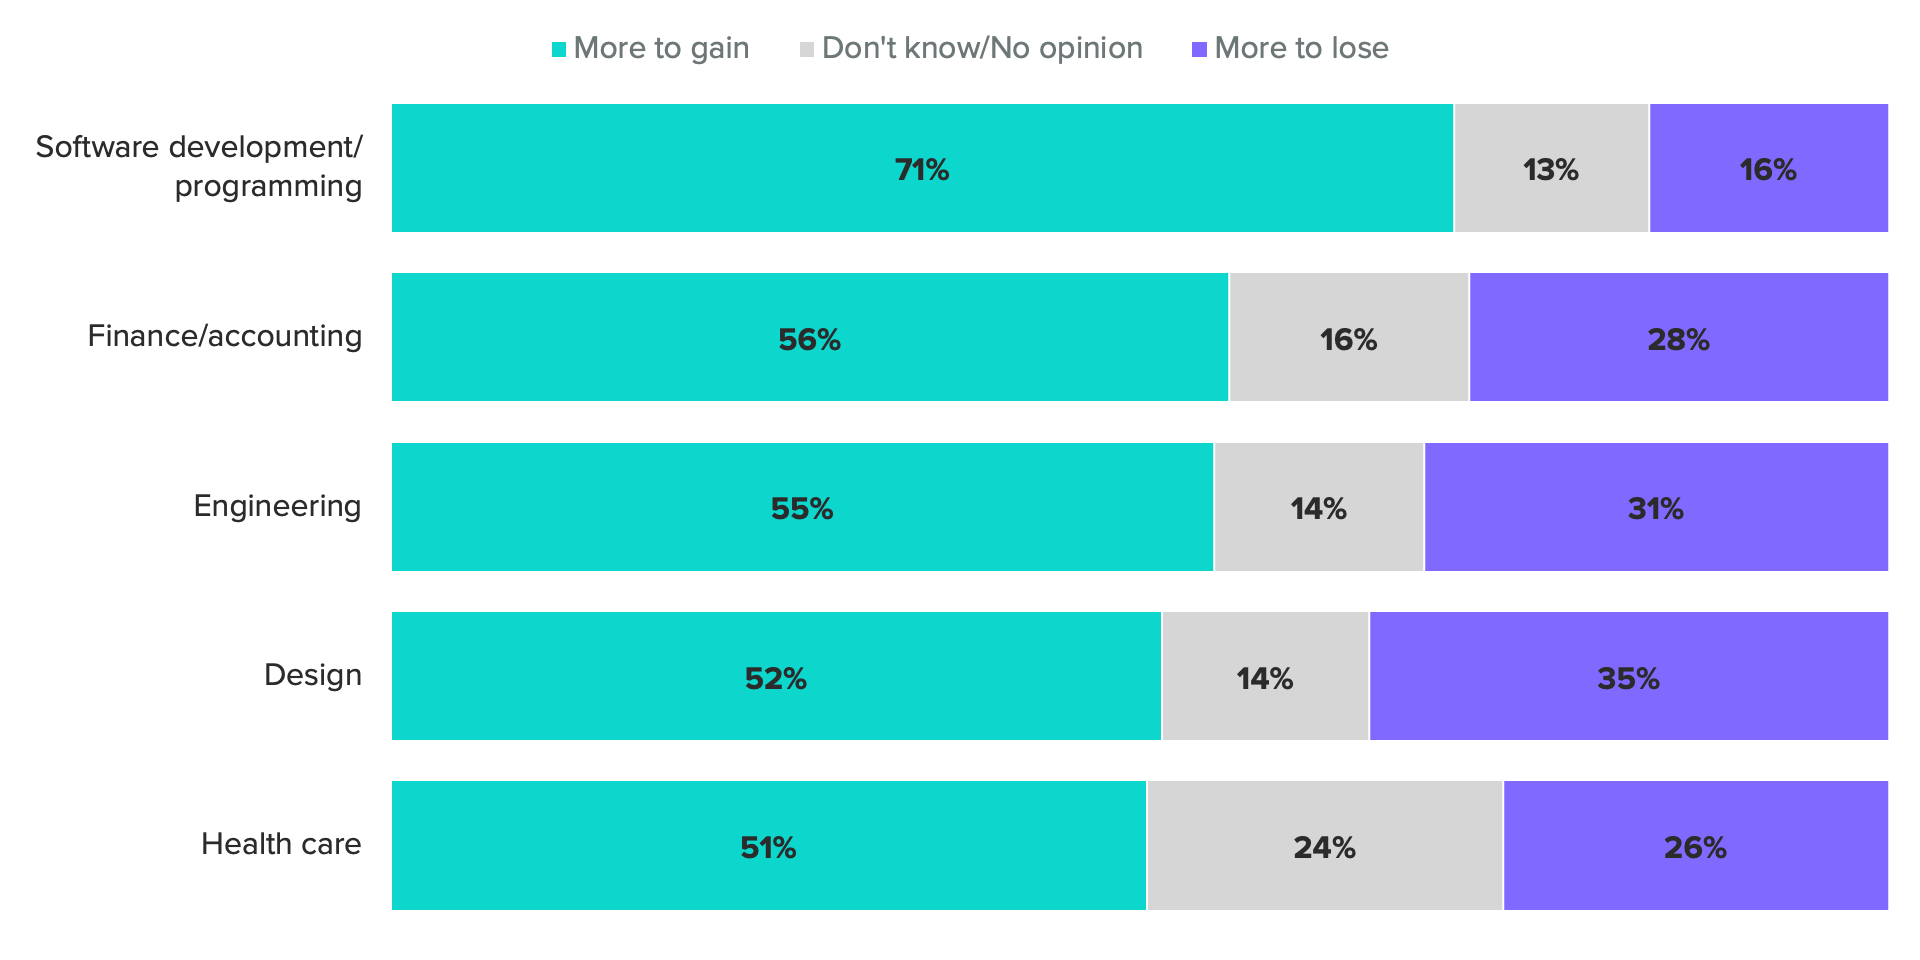 Bar chart of workers' views on whether they and their colleagues would have more to gain or more to lose from further adoptions of generative AI tools in their industries, showing tech workers are more likely to say they have more to gain.